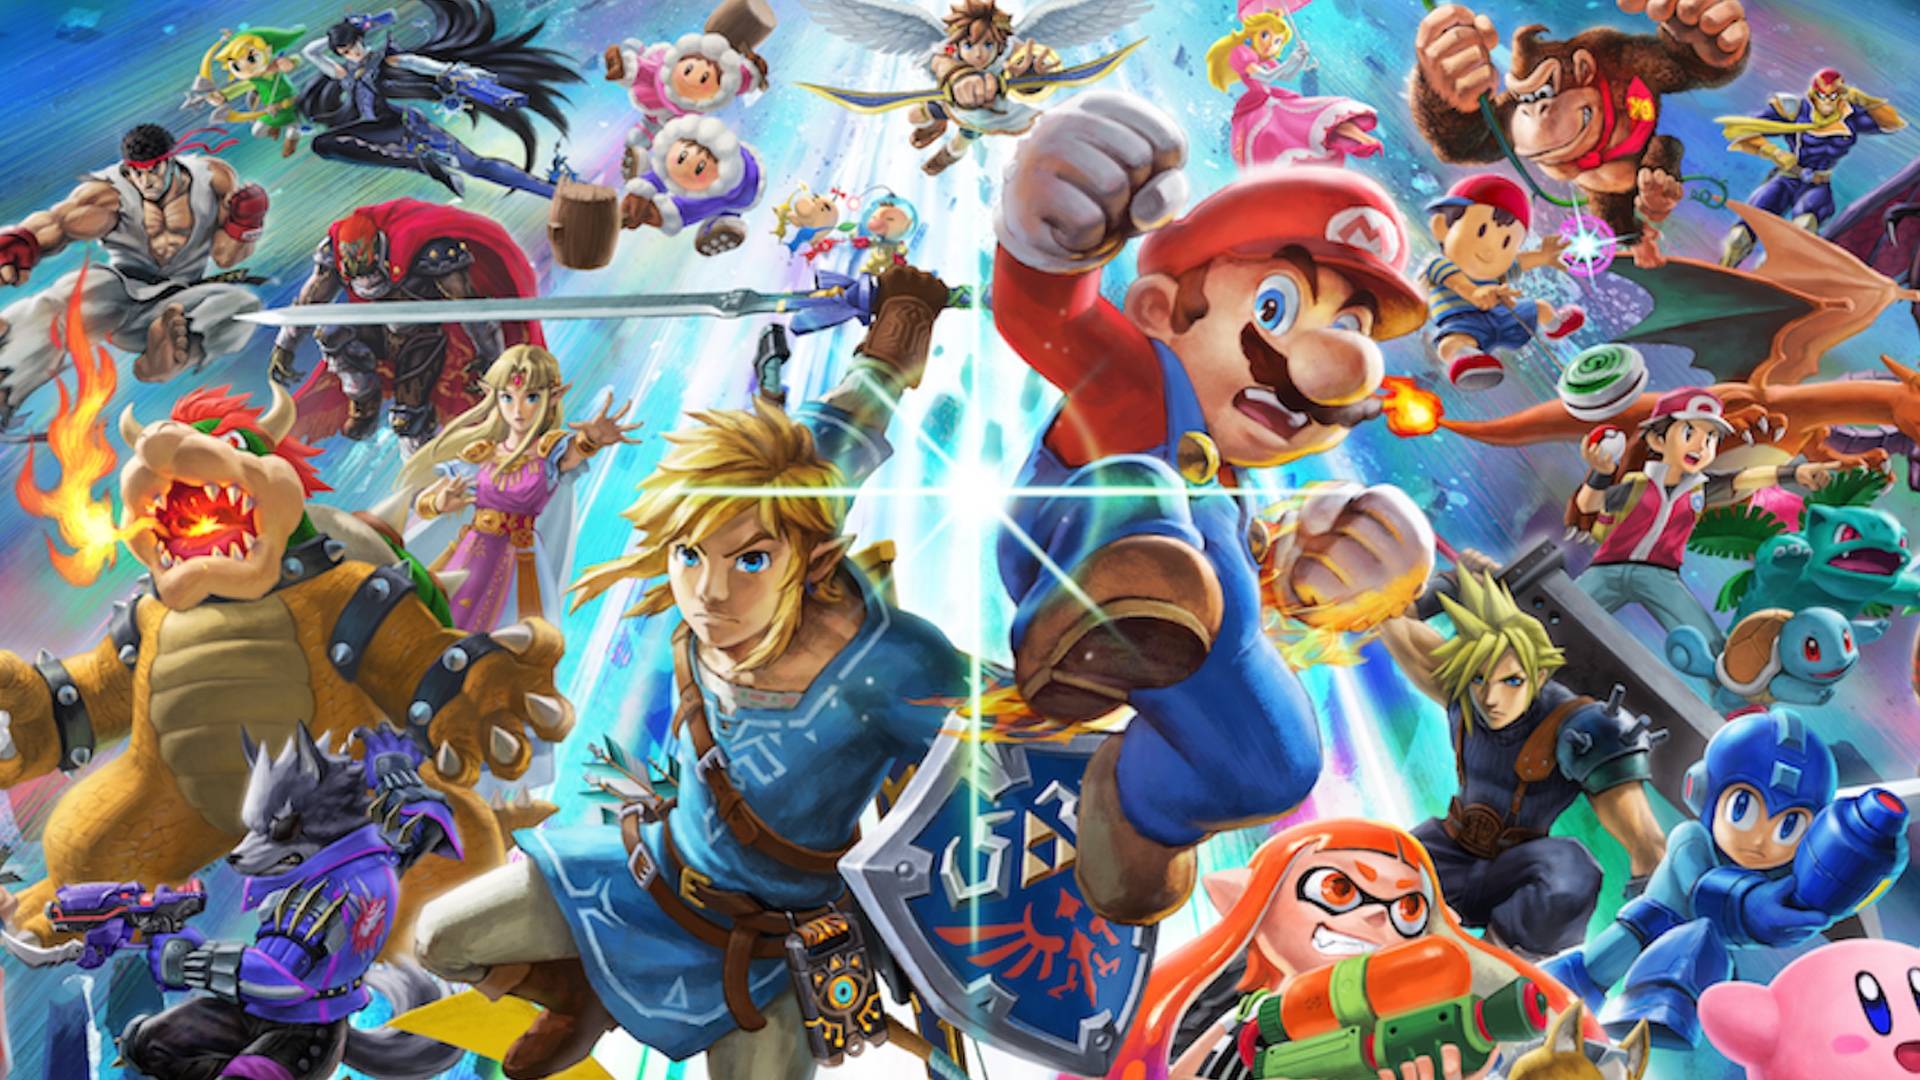 Mario, Link and many other Nintendo characters are jumping forward in a large mural